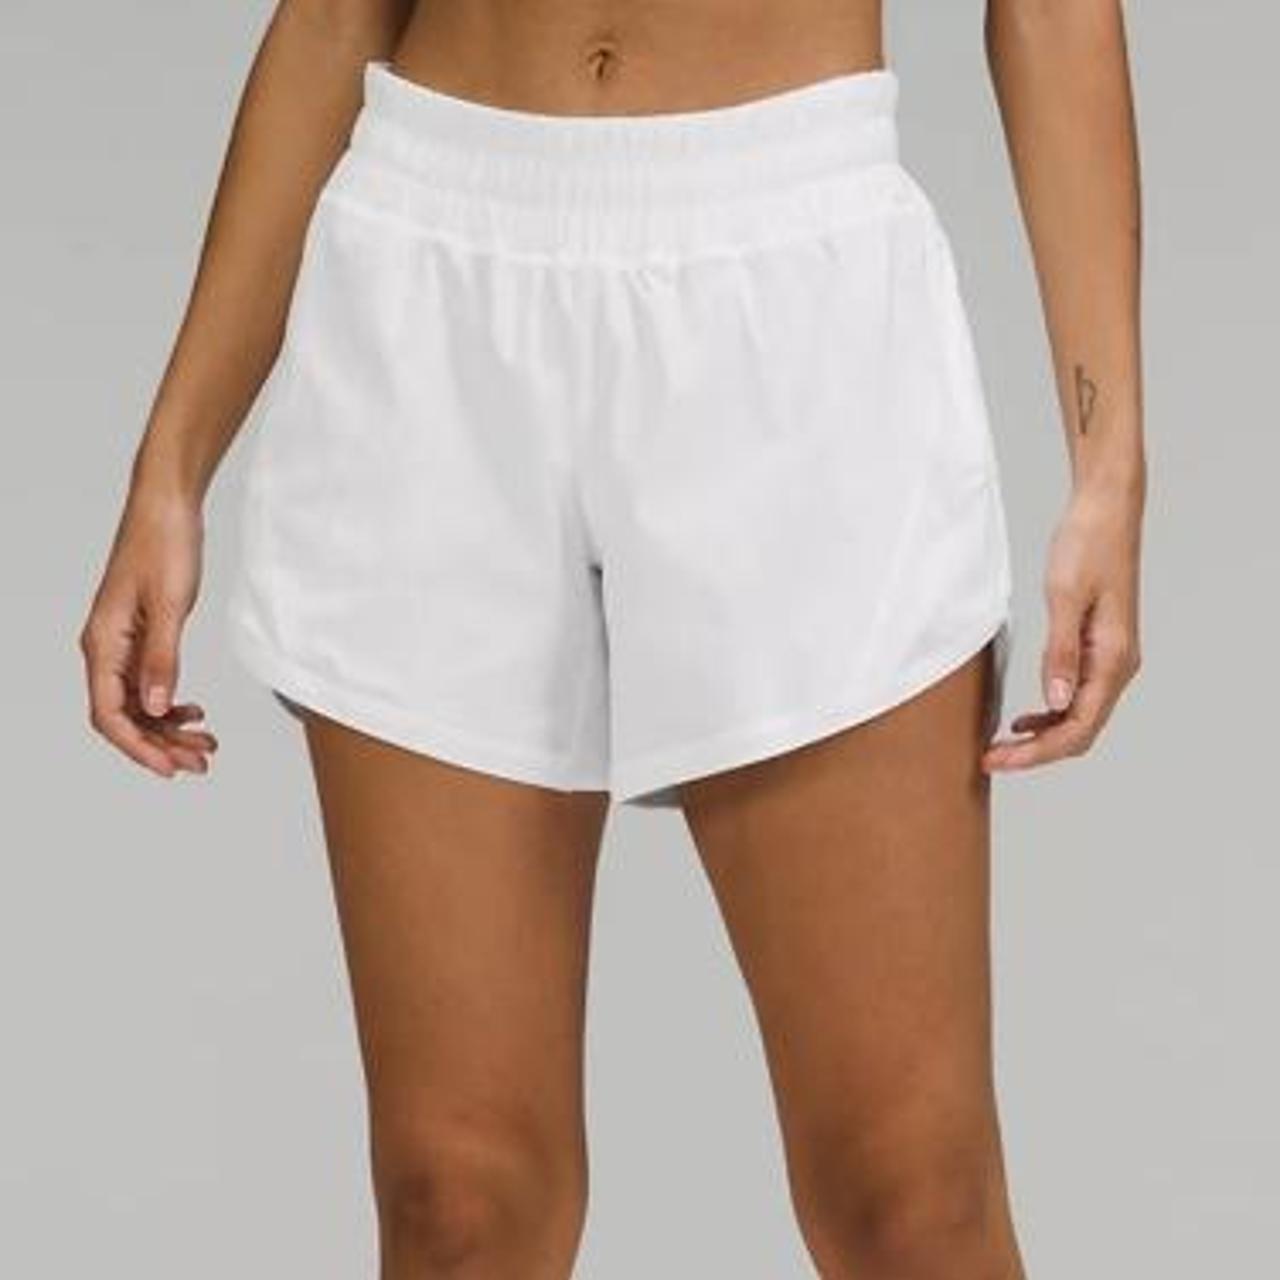 Track That Mid-Rise Lined Short 5, Shorts